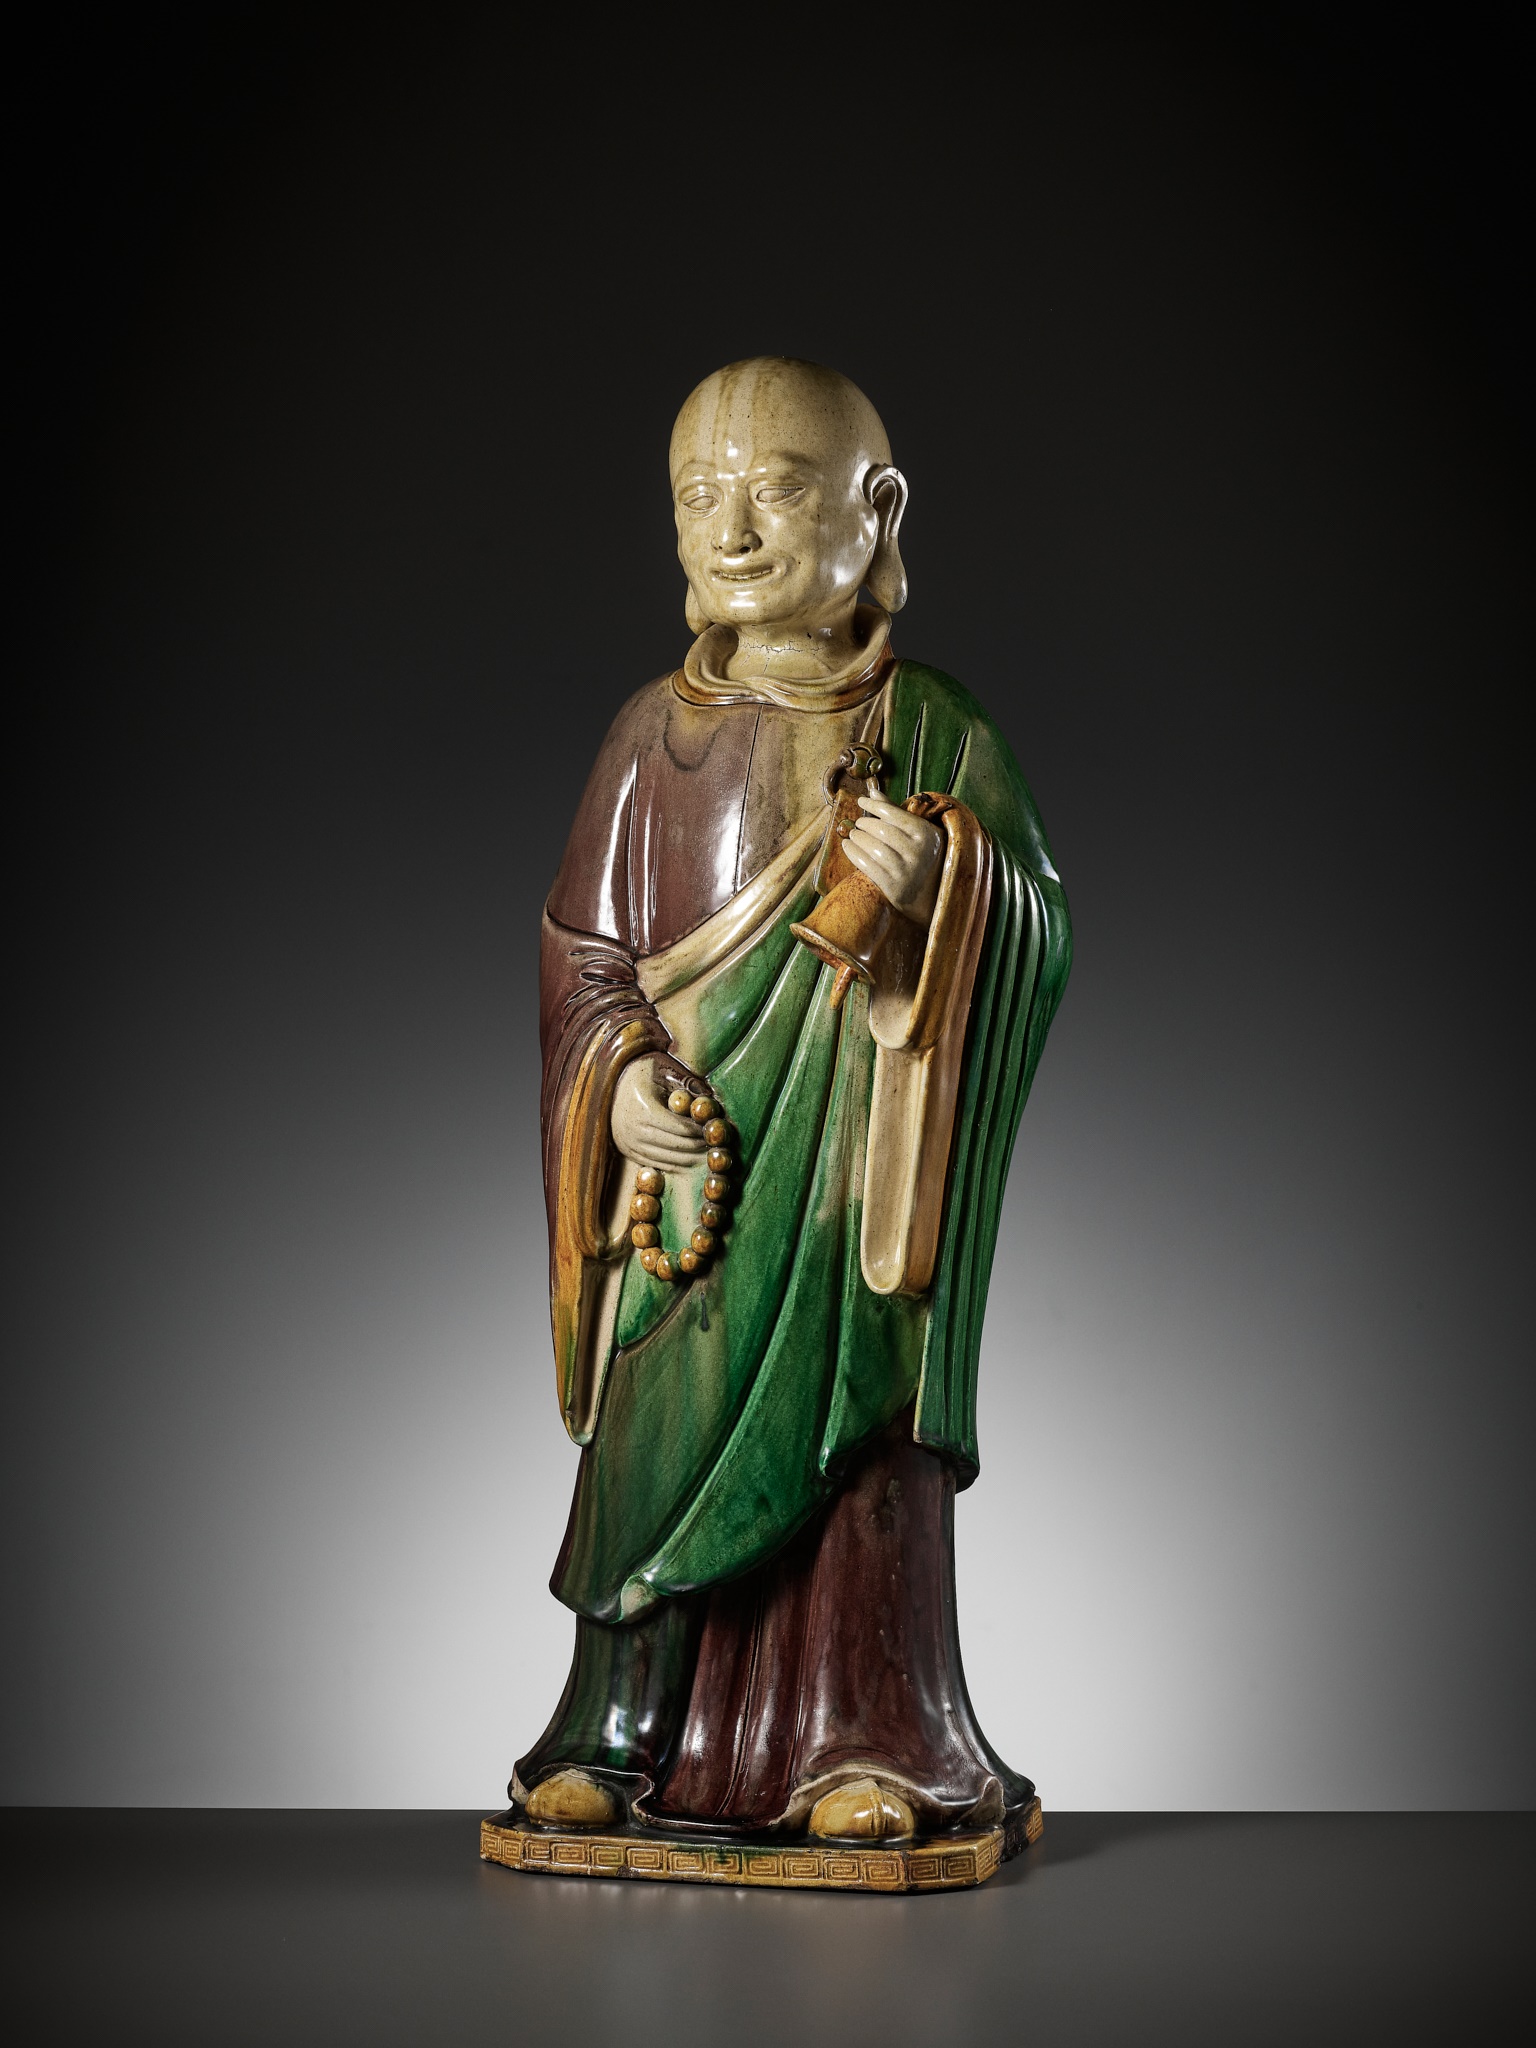 A MASSIVE SANCAI-GLAZED FIGURE OF A MONK, LATE MING DYNASTY TO KANGXI PERIOD - Image 16 of 16